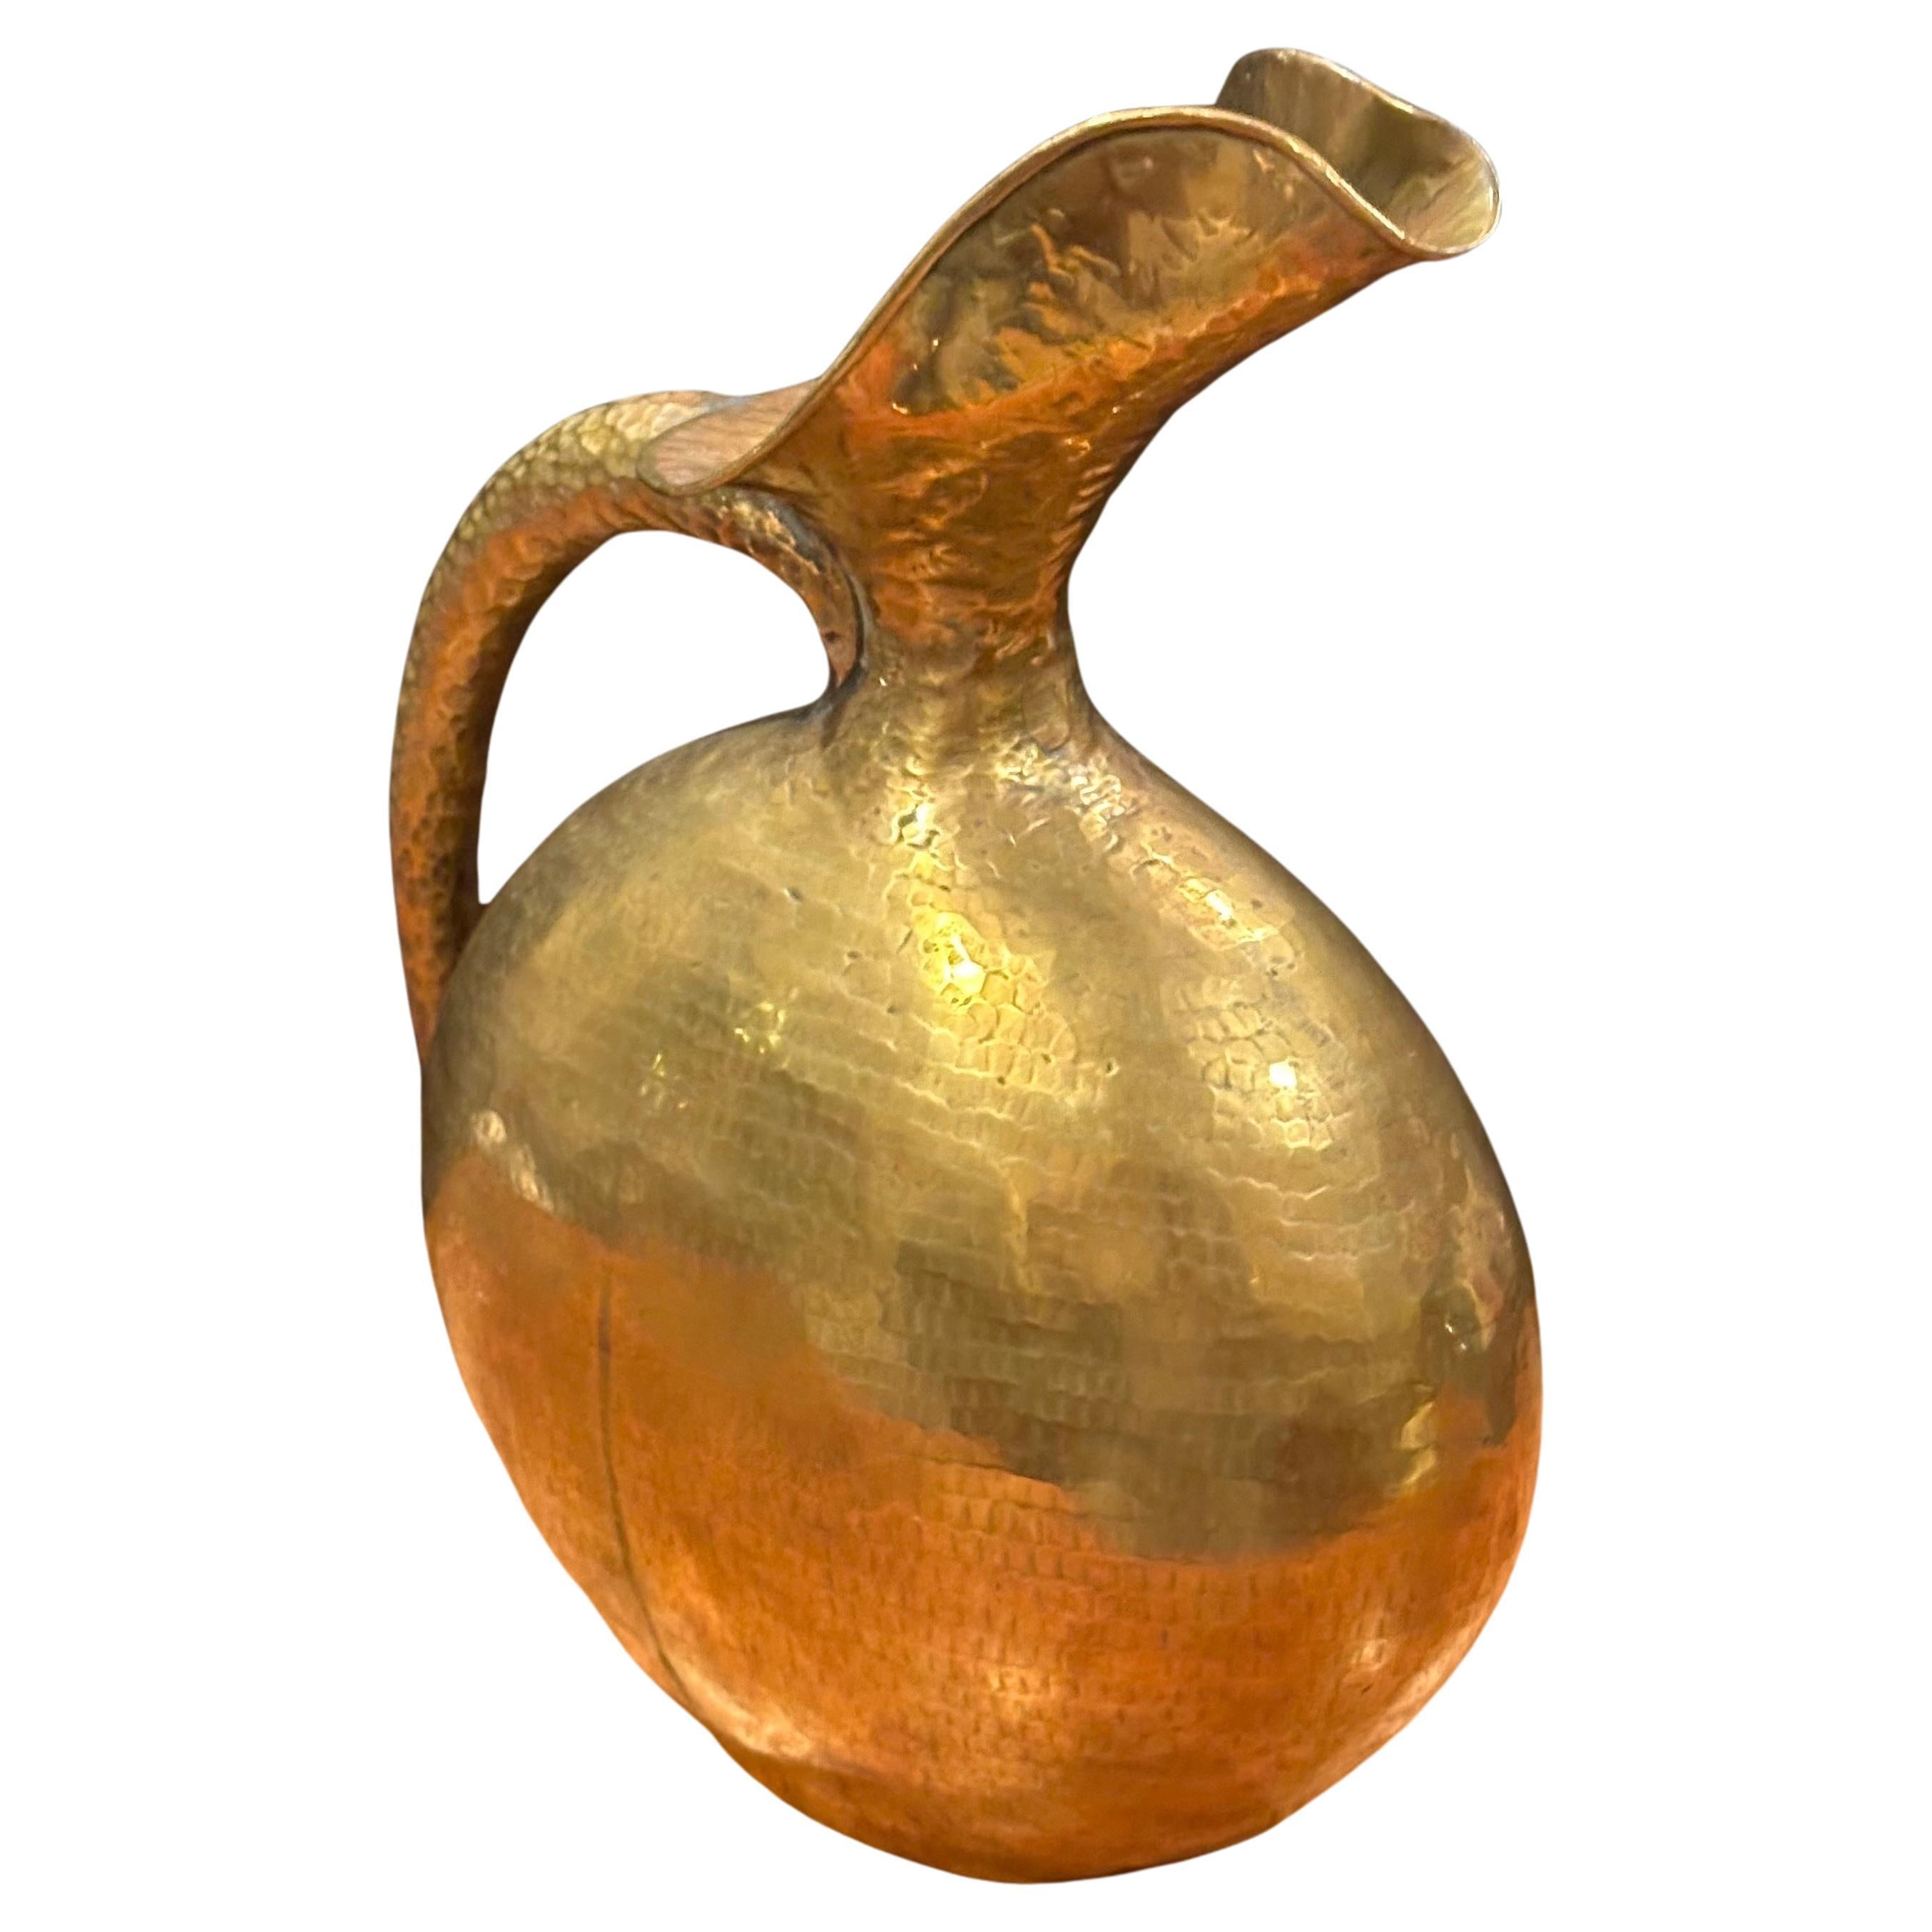 Italian Modernist Hammered Brass Pitcher by Egidio Casagrande In Good Condition For Sale In San Diego, CA